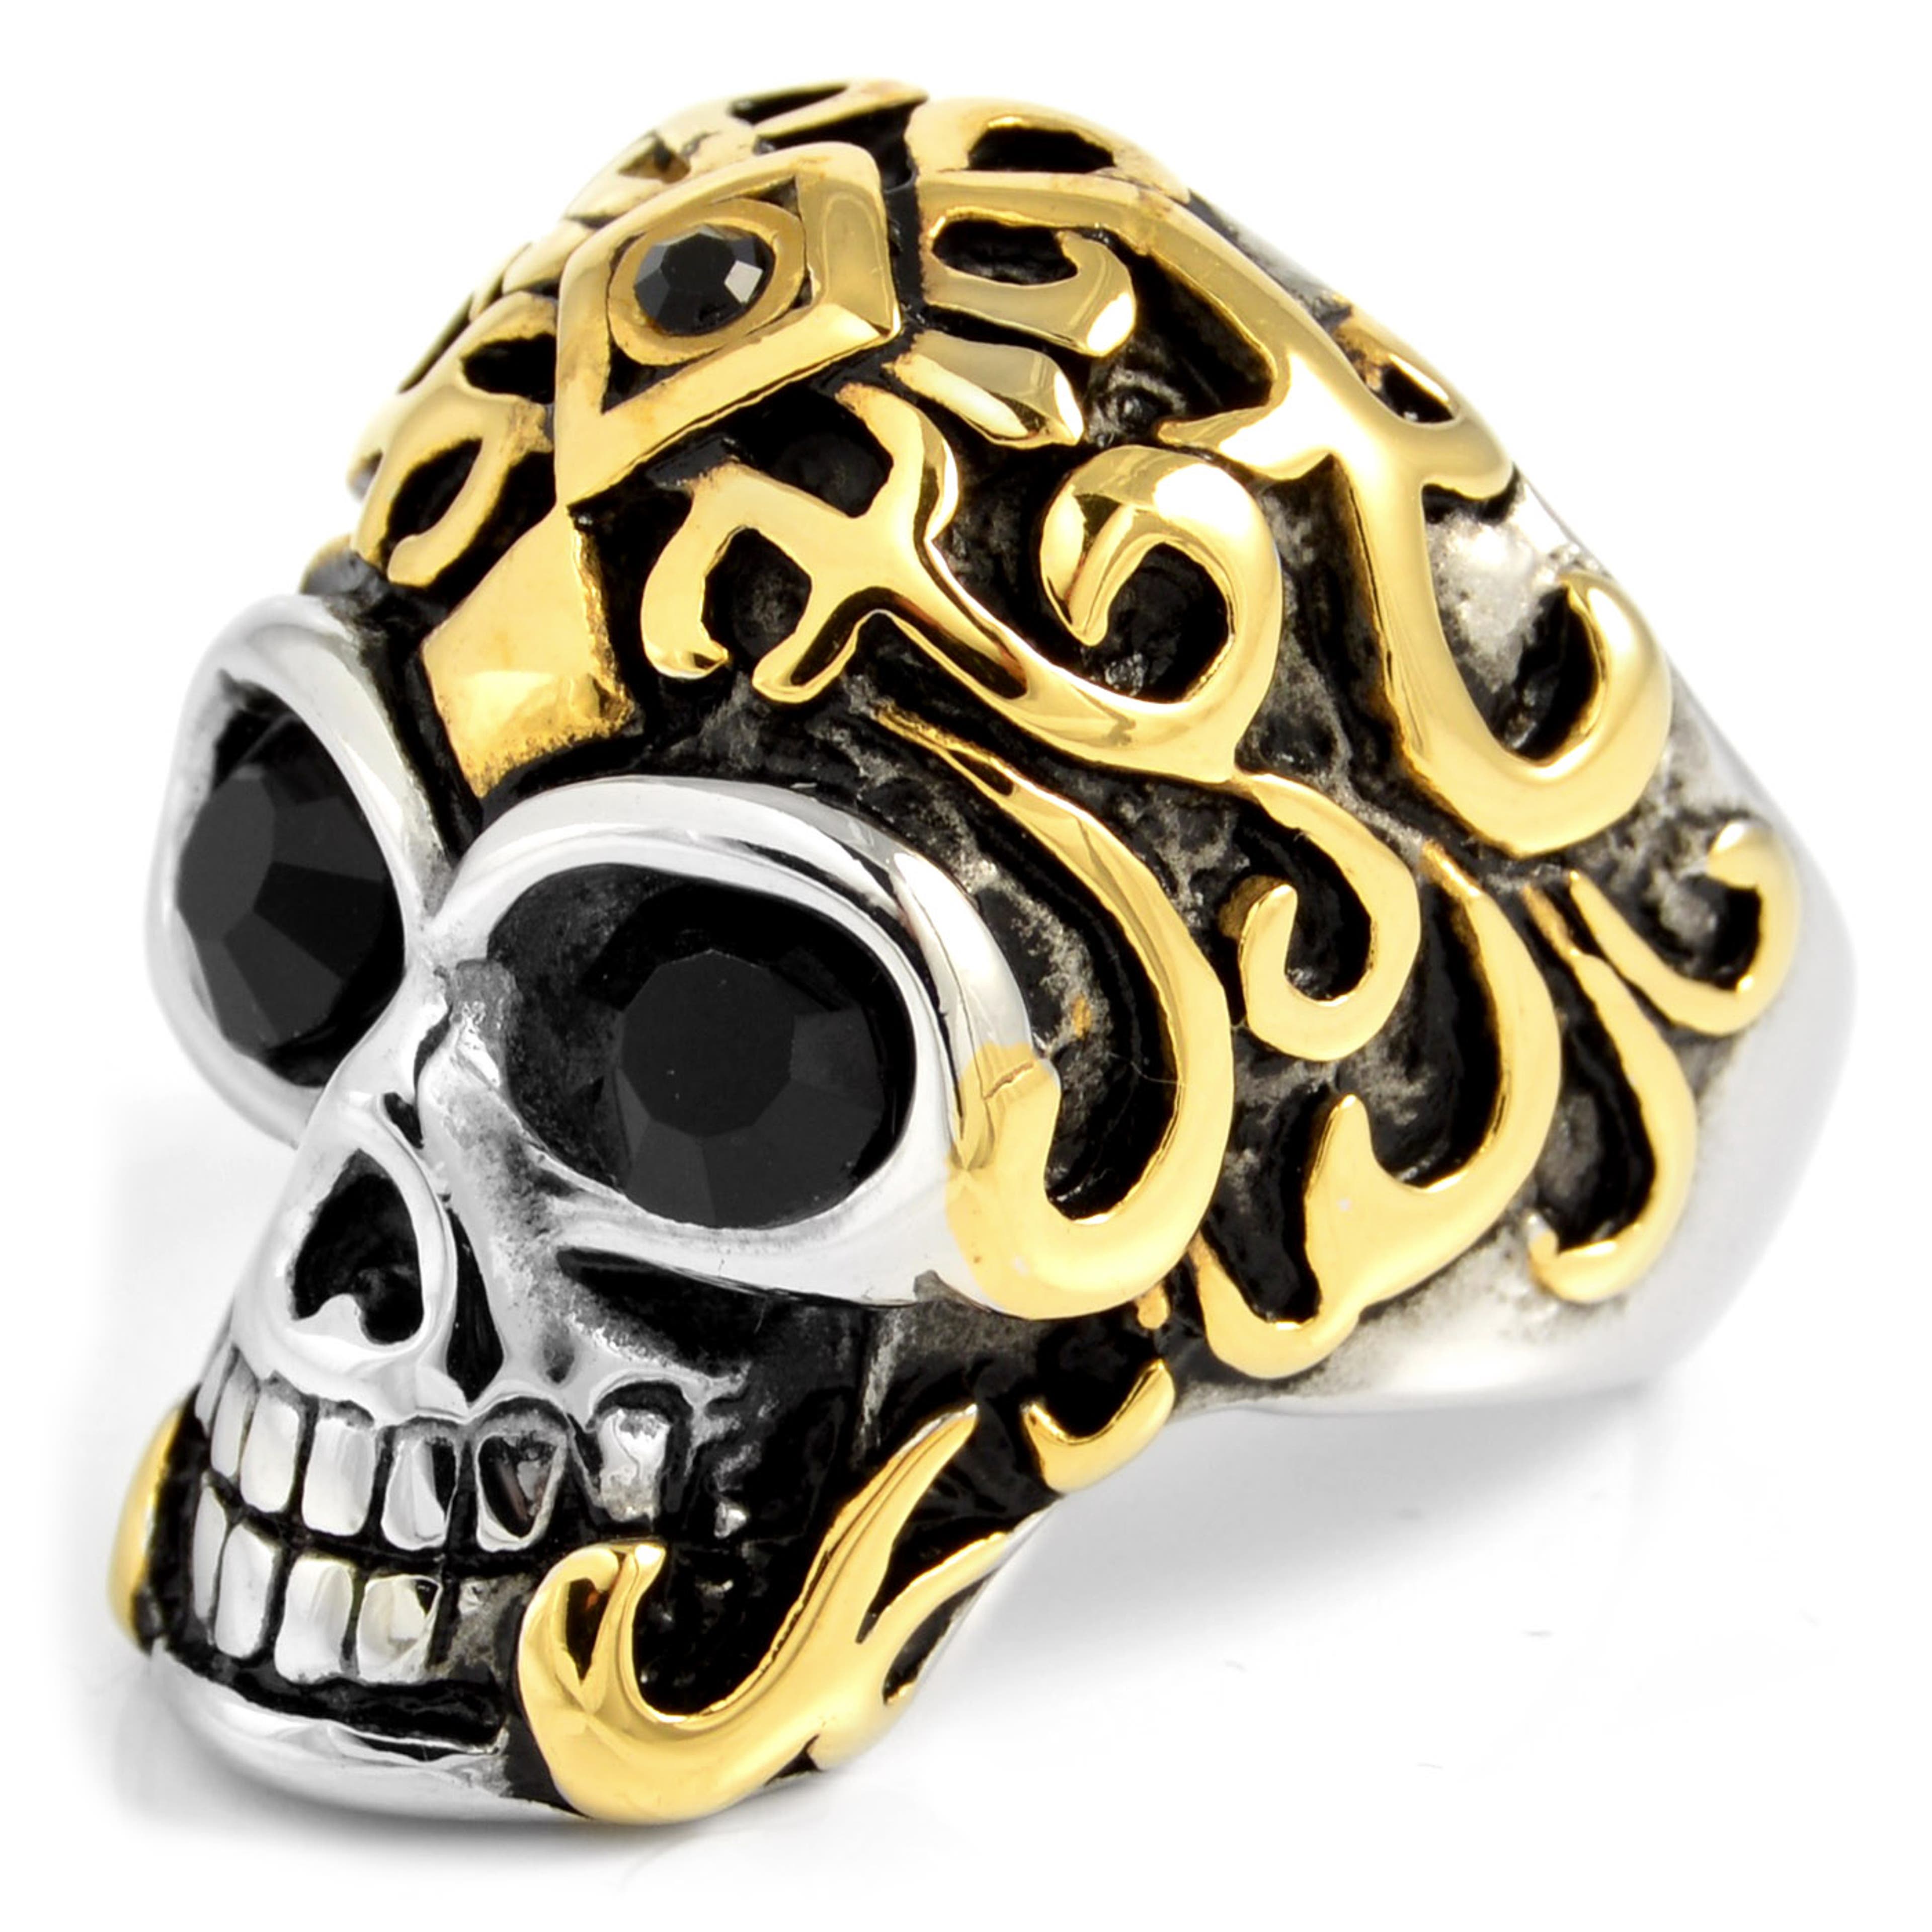 Gold- & Silver-Tone Crowned Skull Ring